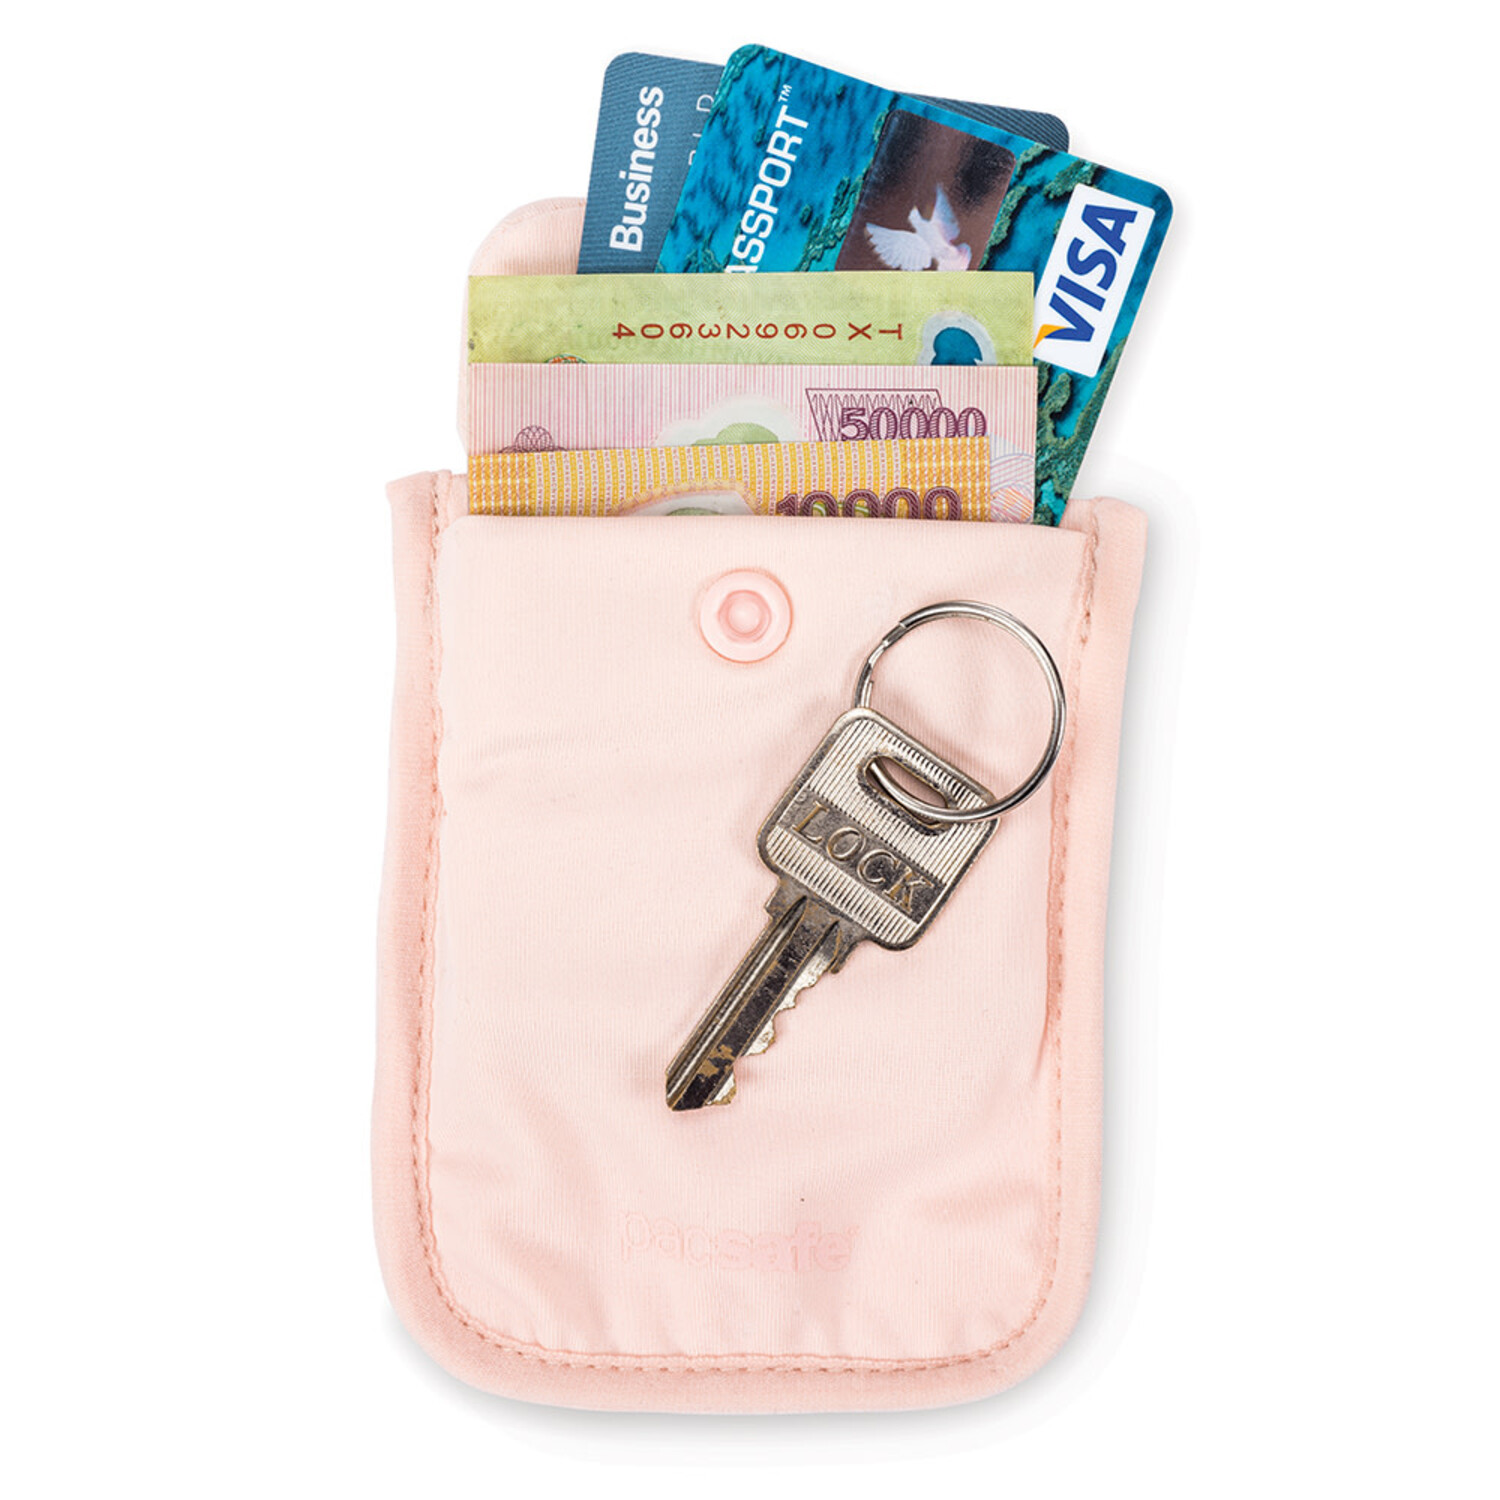 Pacsafe Coversafe S25 Secret Travel Bra Pouch - Just Bags Luggage